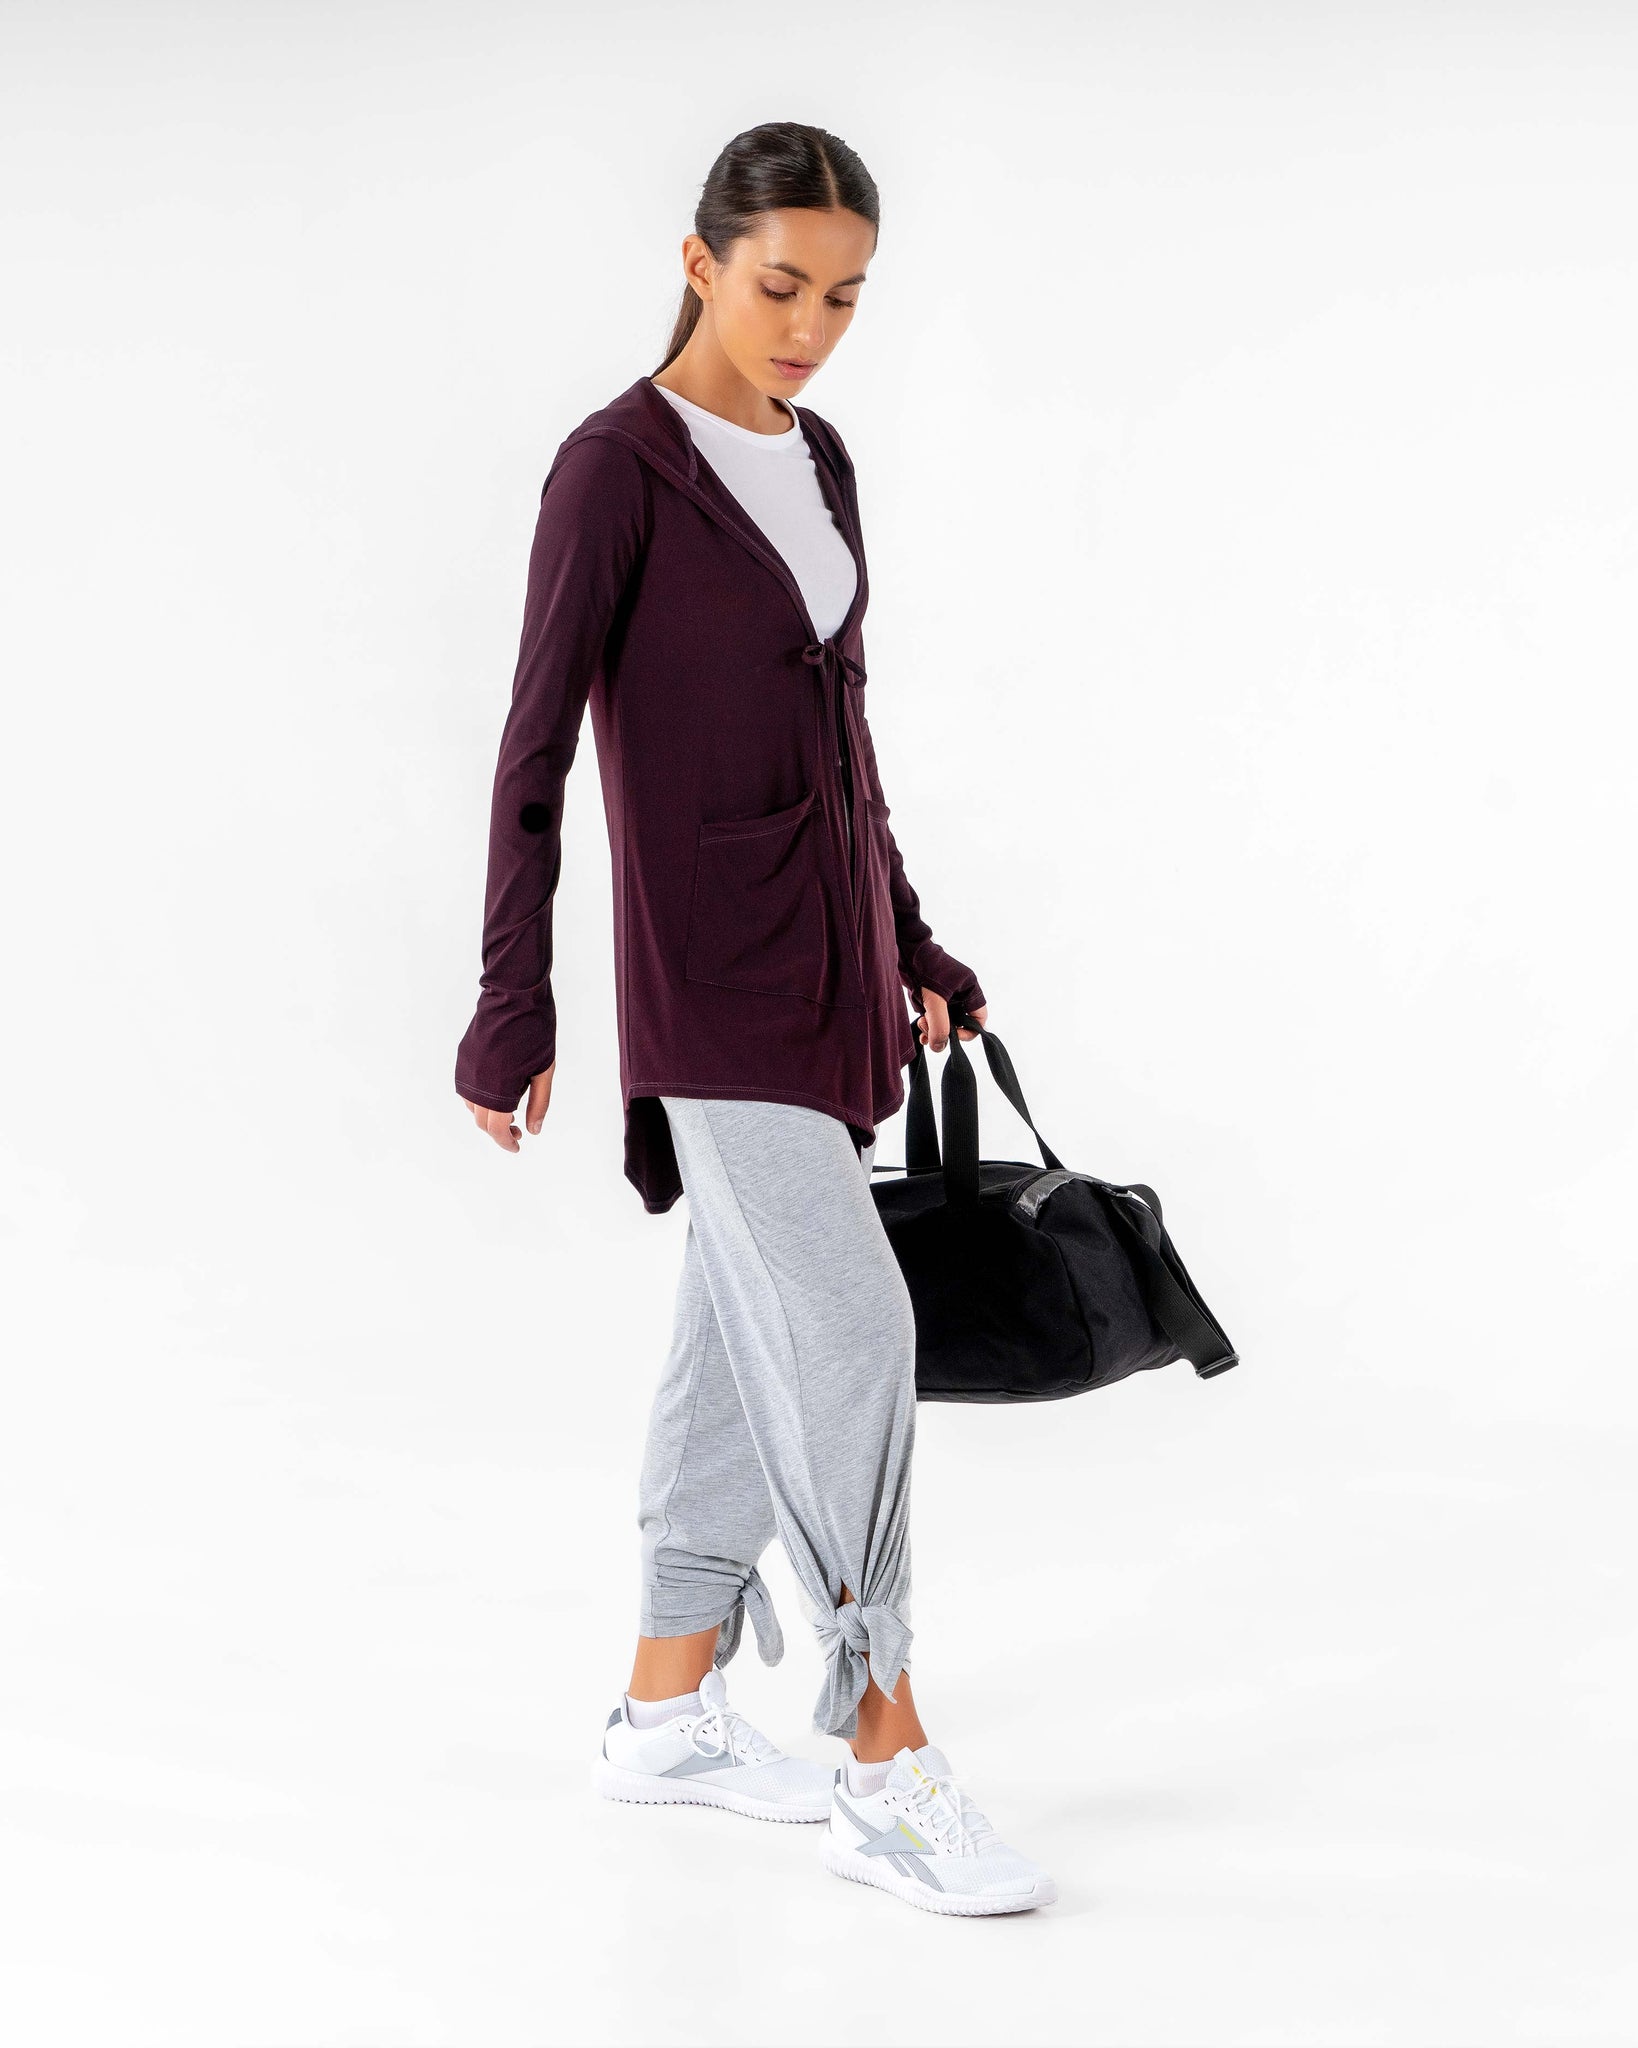 Move It Cardigan in burgundy by Veil Garments. Modest activewear collection.